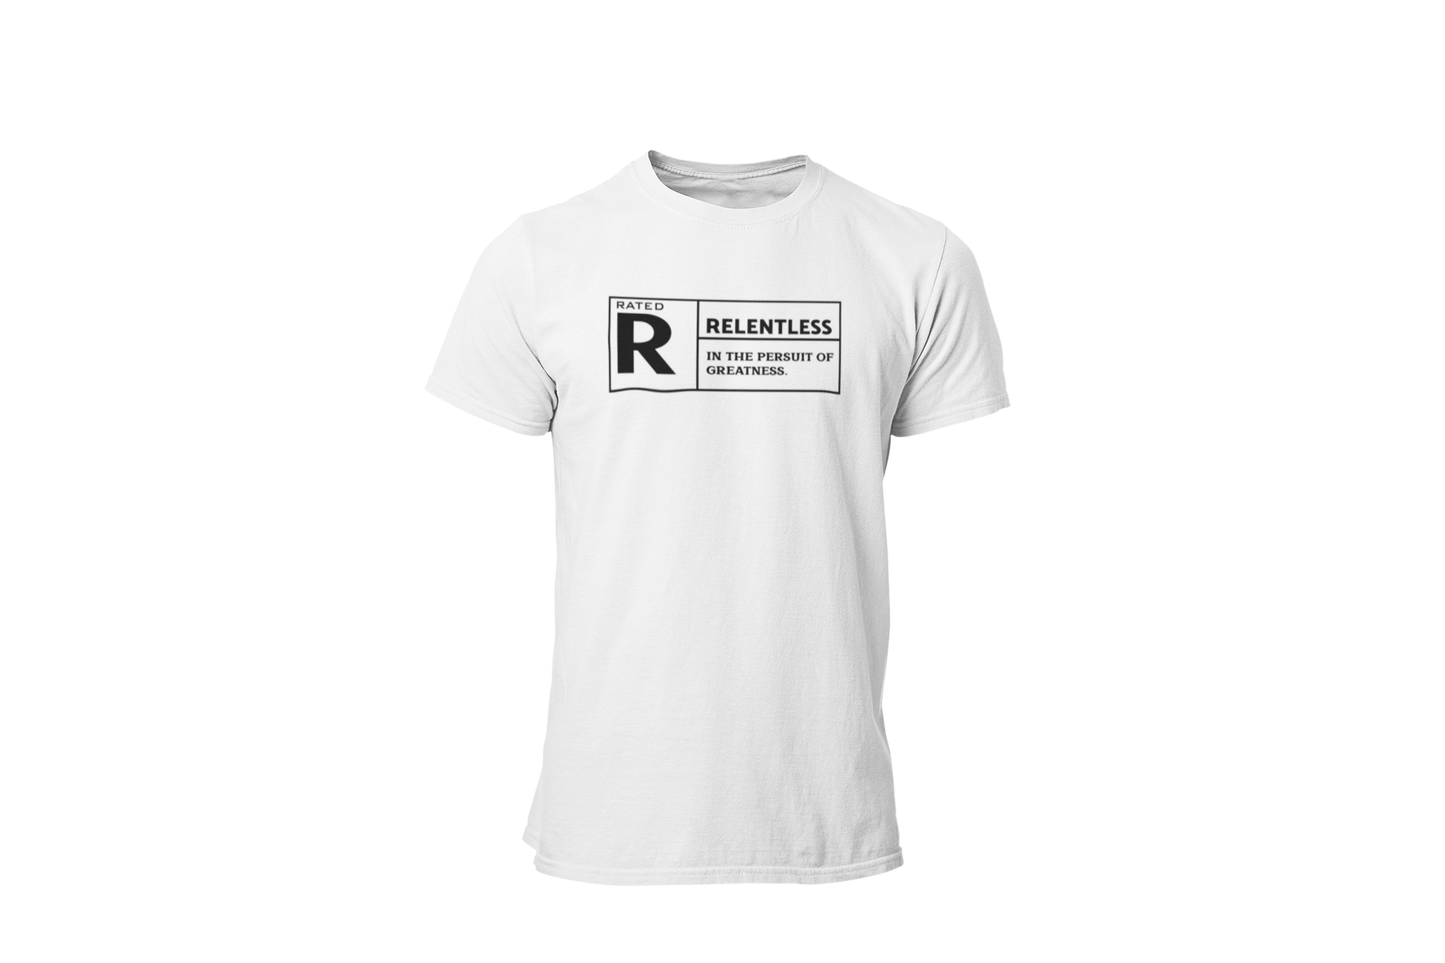 Rated R for RELENTLESS TMF Branded T Shirt